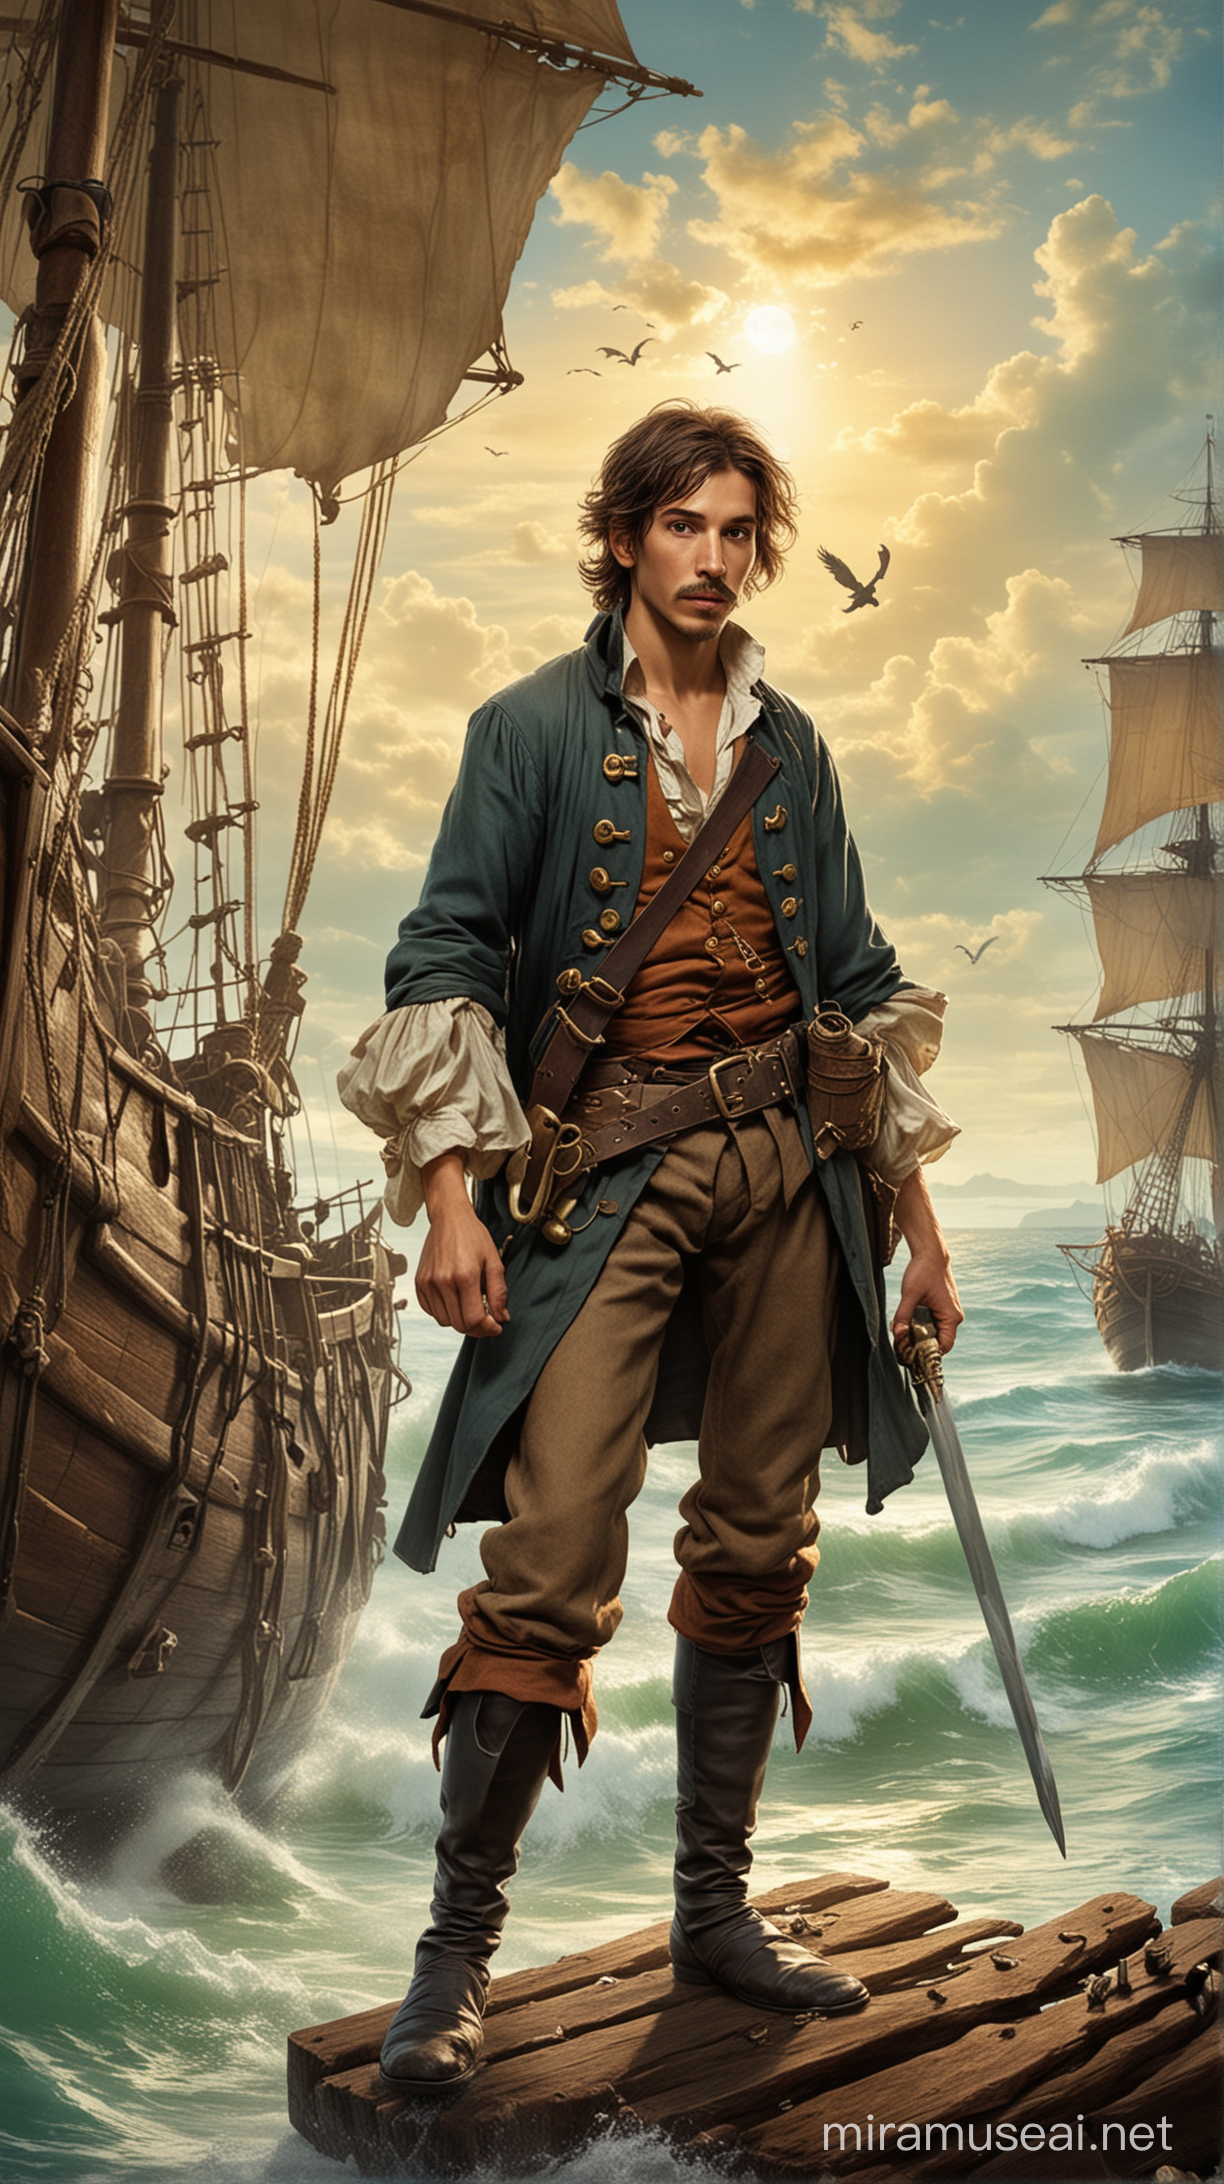 Create a cover image of Robert Louis Stevenson's Treasure Island. Show the old one-legged pirate Long John Silver and the boy Jim Hawkins.